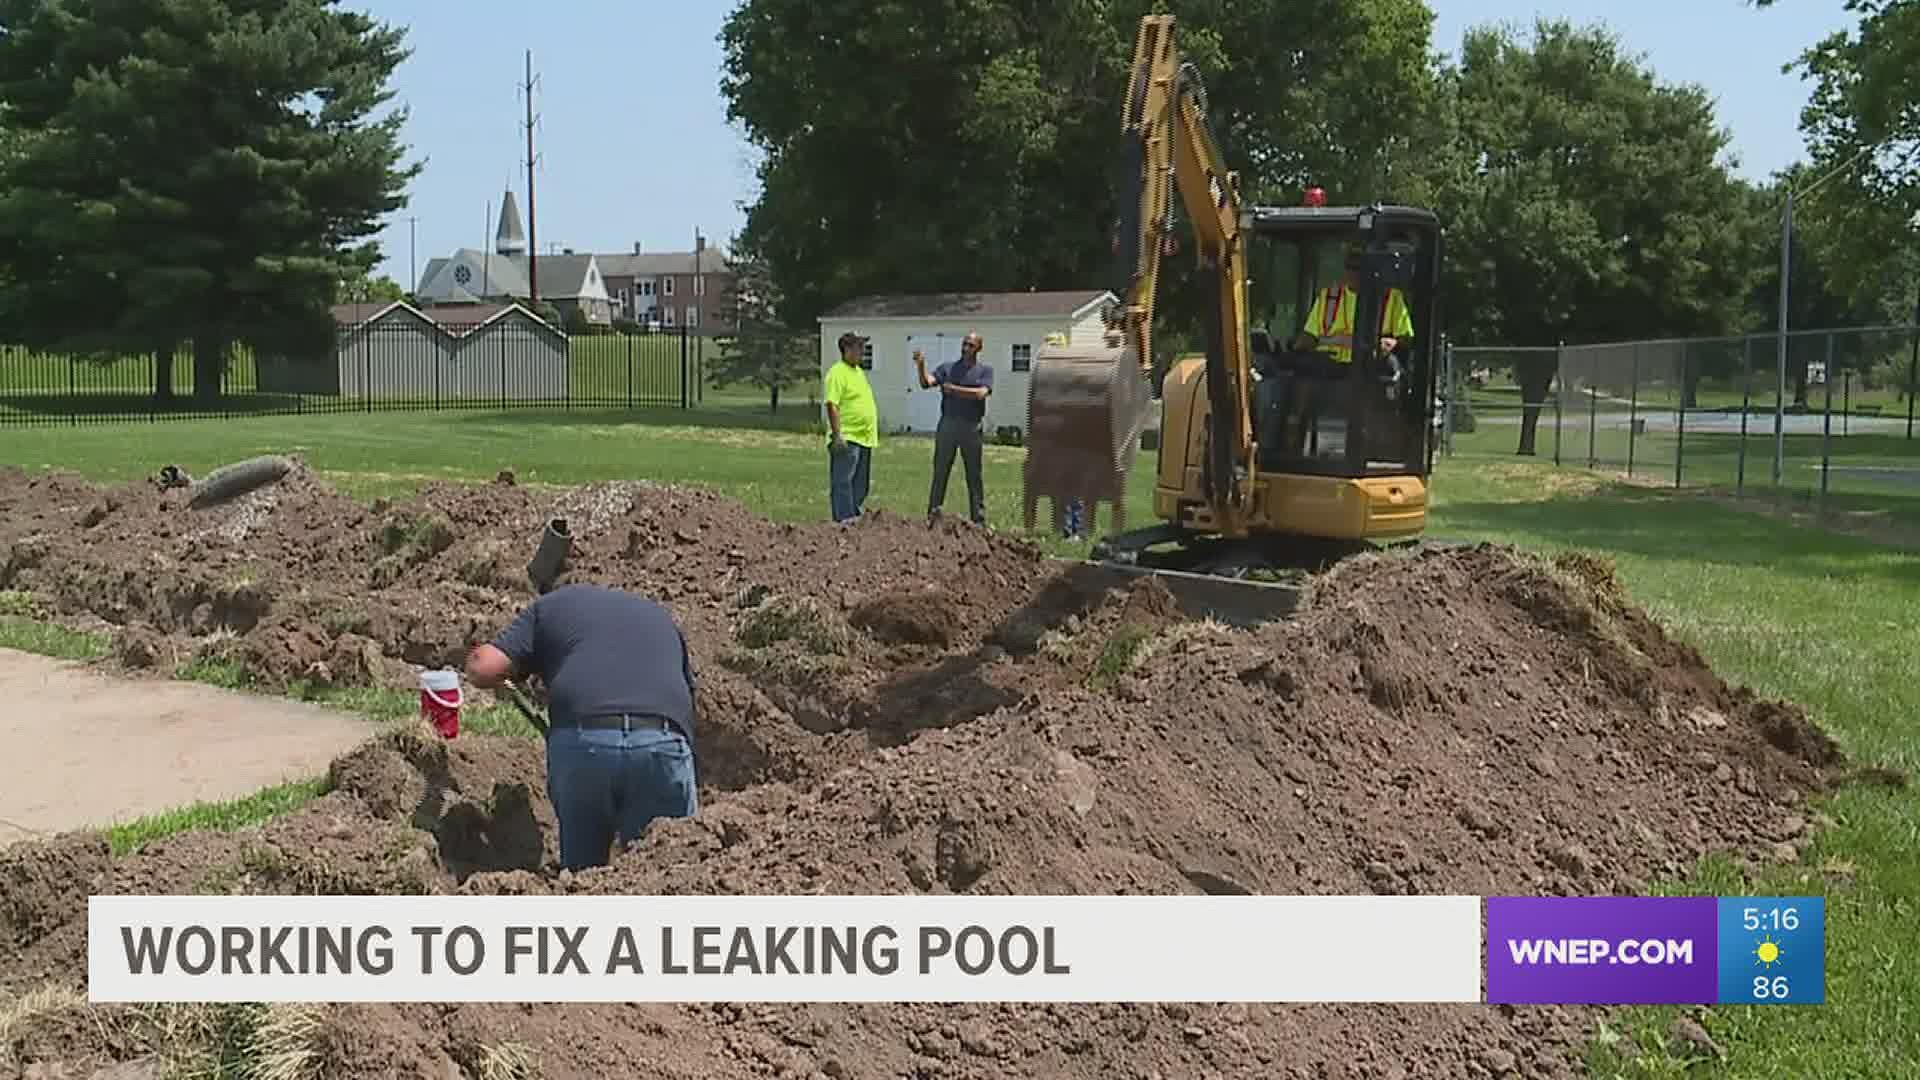 More than 1 million gallons of water was wasted in 2019 because of the leak at Memorial Pool.